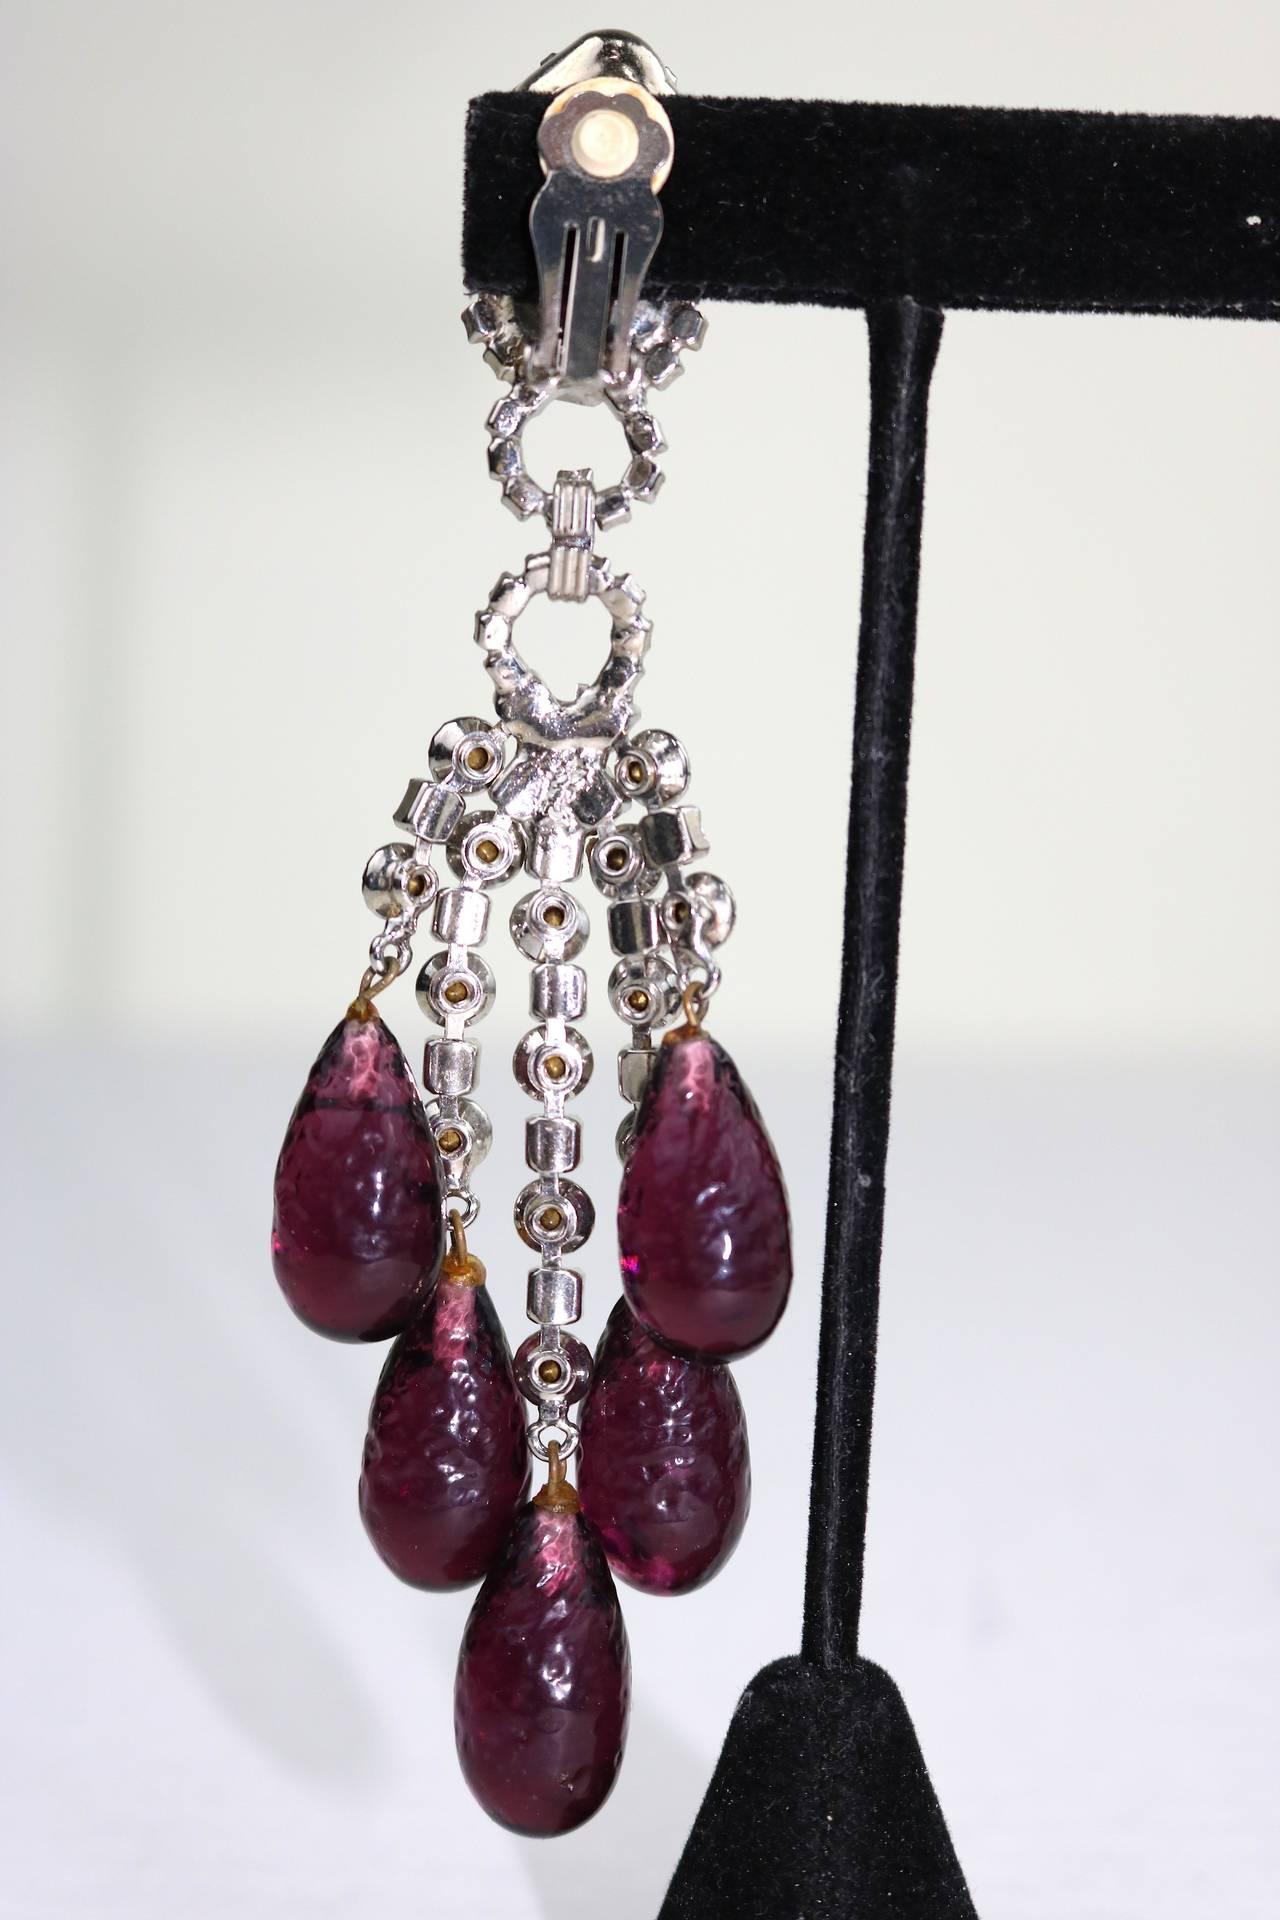 Spectacular runway shoulder-duster one of a kind chandelier drop earrings by Robert Sorrell. The Crystal Amethyst Briolettes Drops from faceted sparkly Faux Diamonds in a silver-tone setting. In very good condition, these clip earrings measure 5